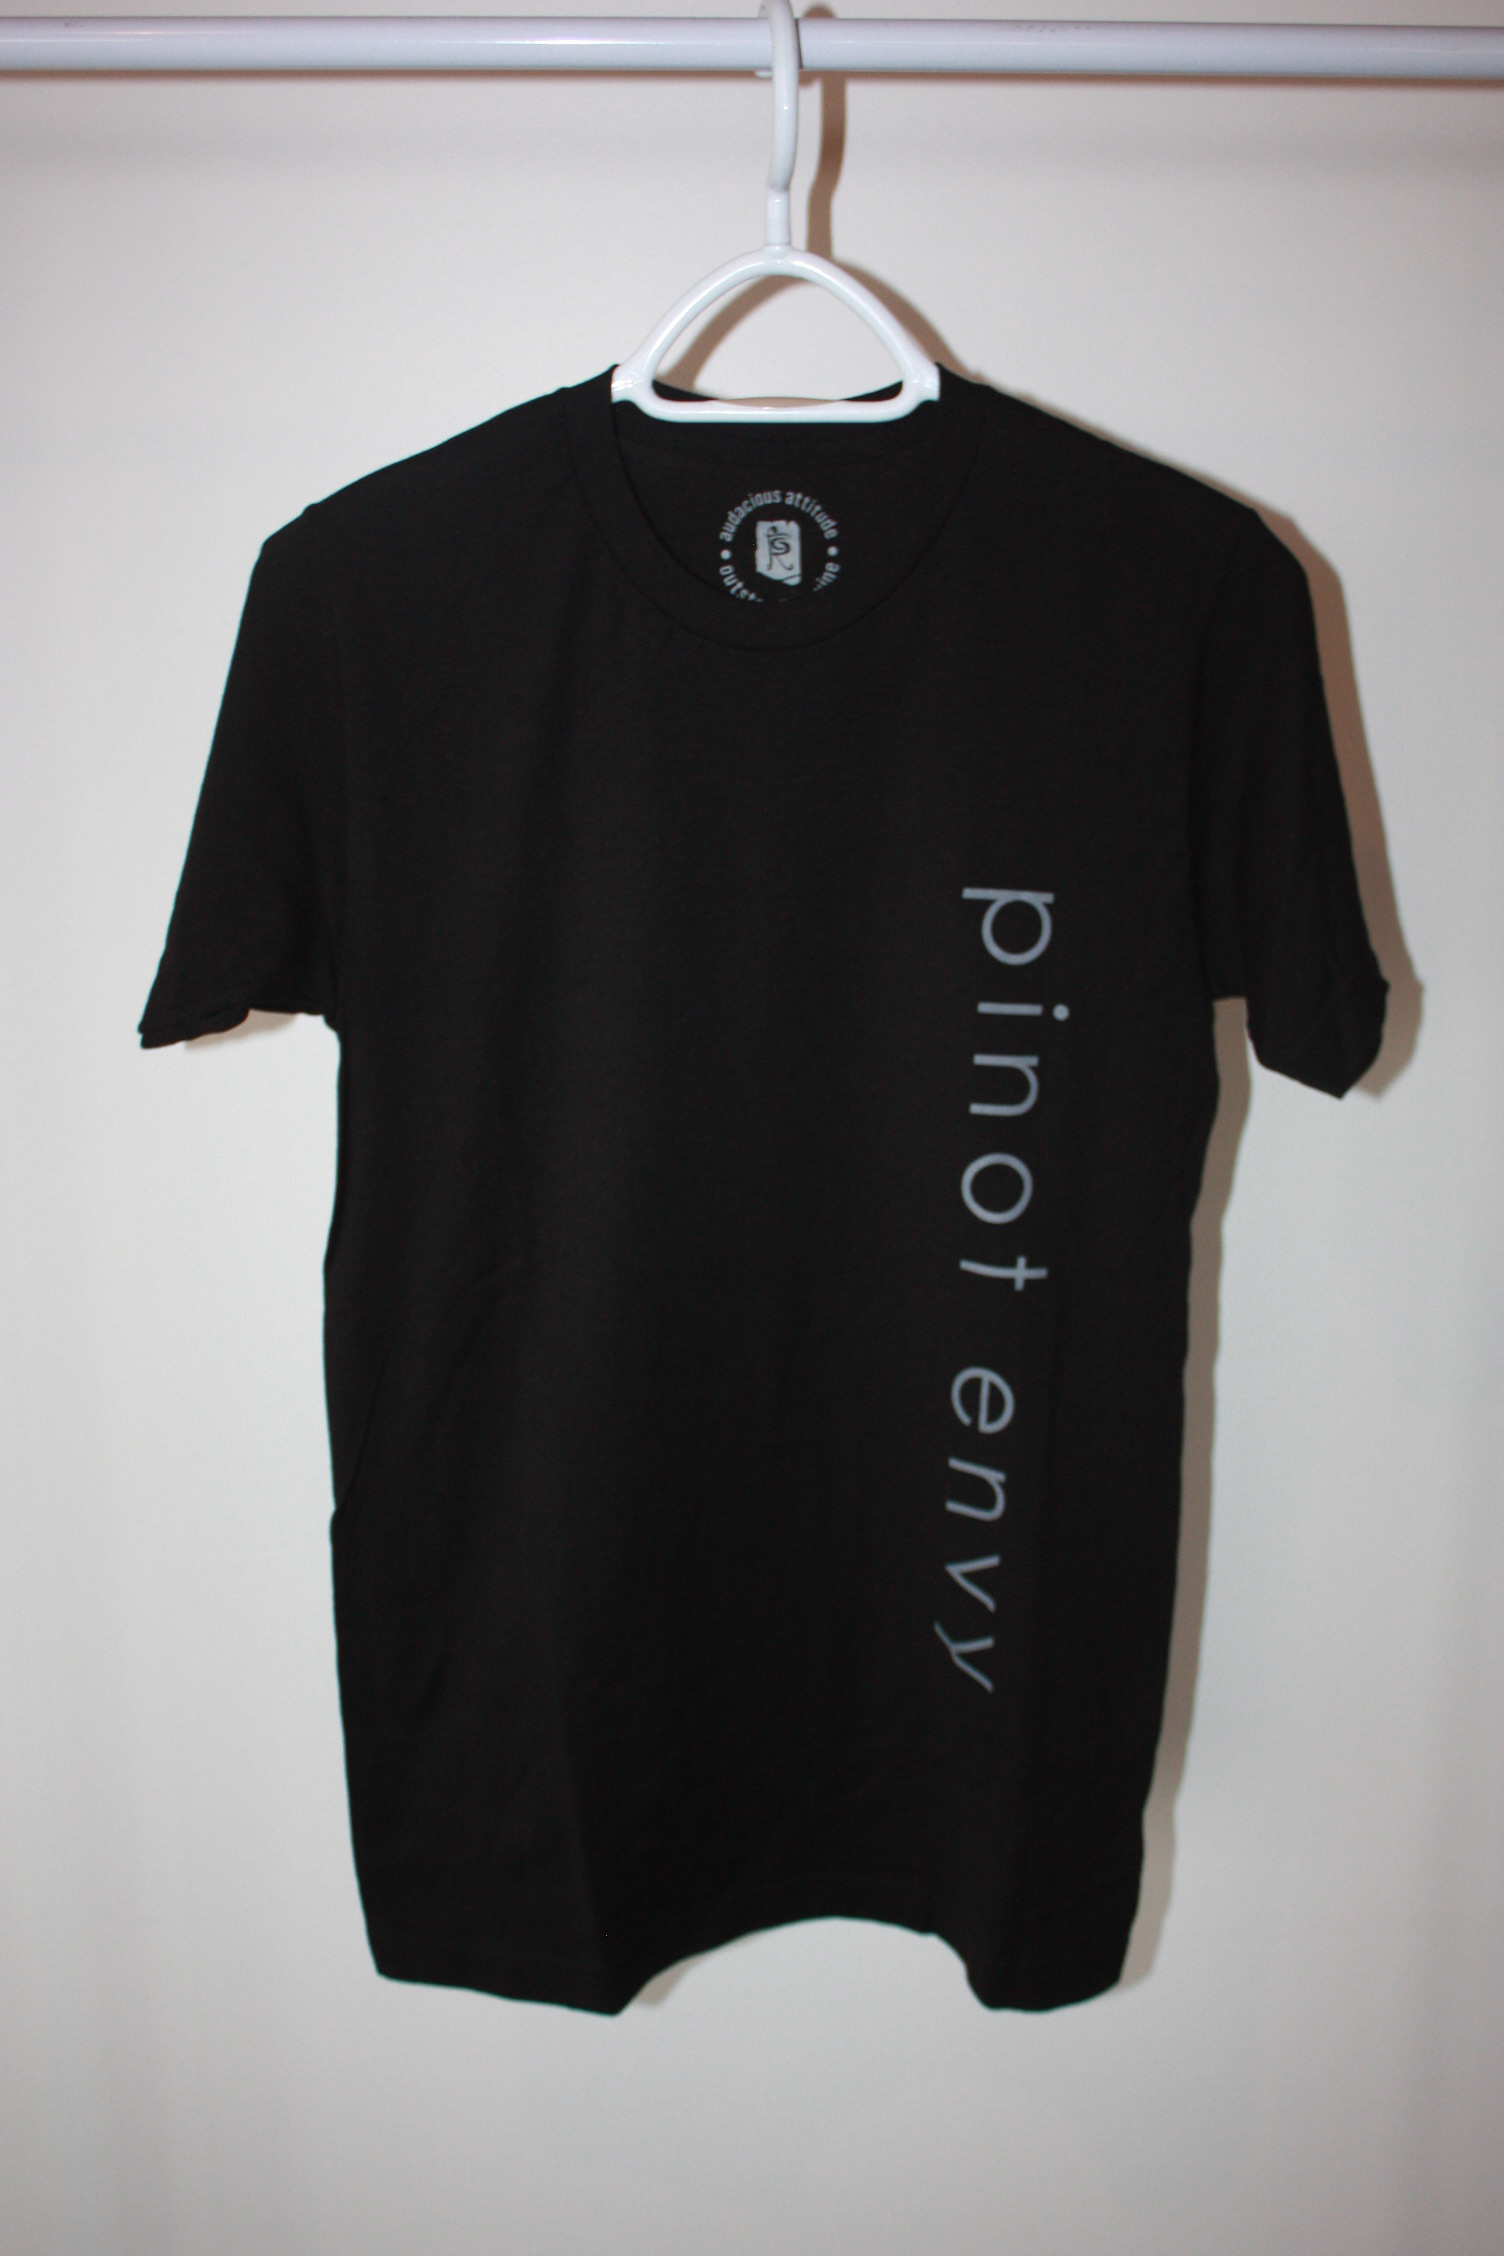 Product Image for Pinot Envy Men's T-Shirt